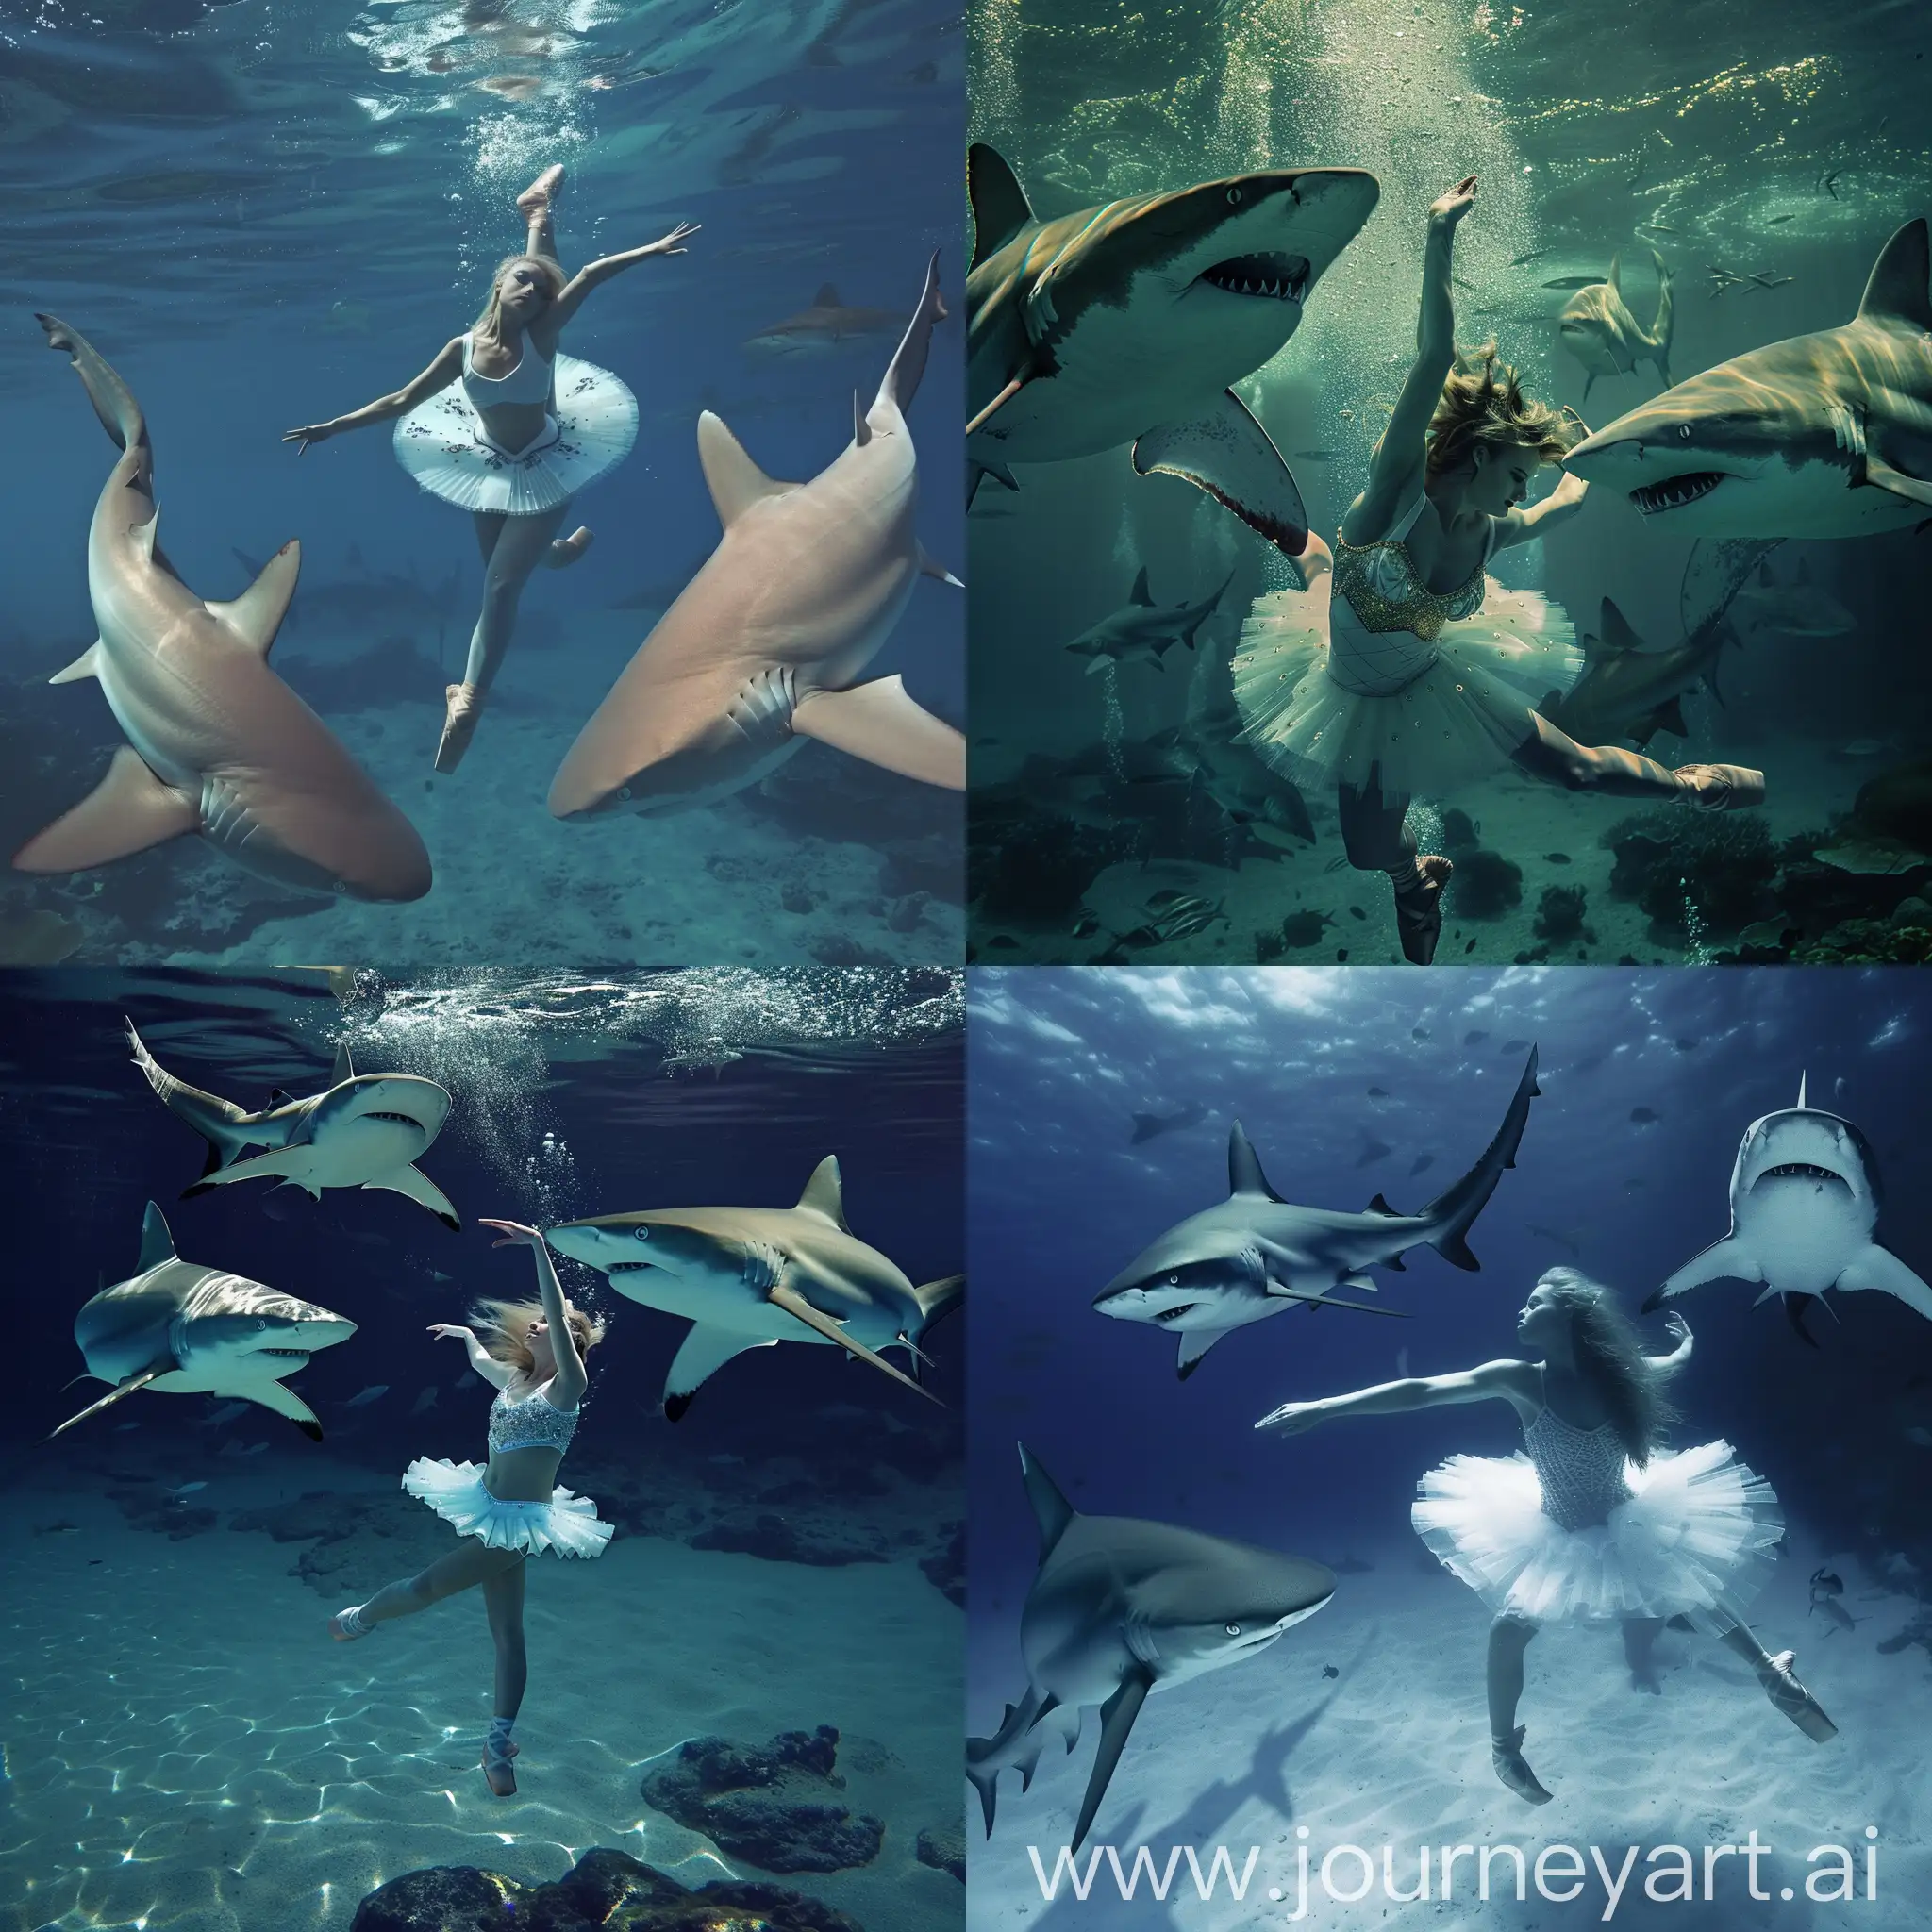 An image of a ballet dancer underwater with three large sharks around her